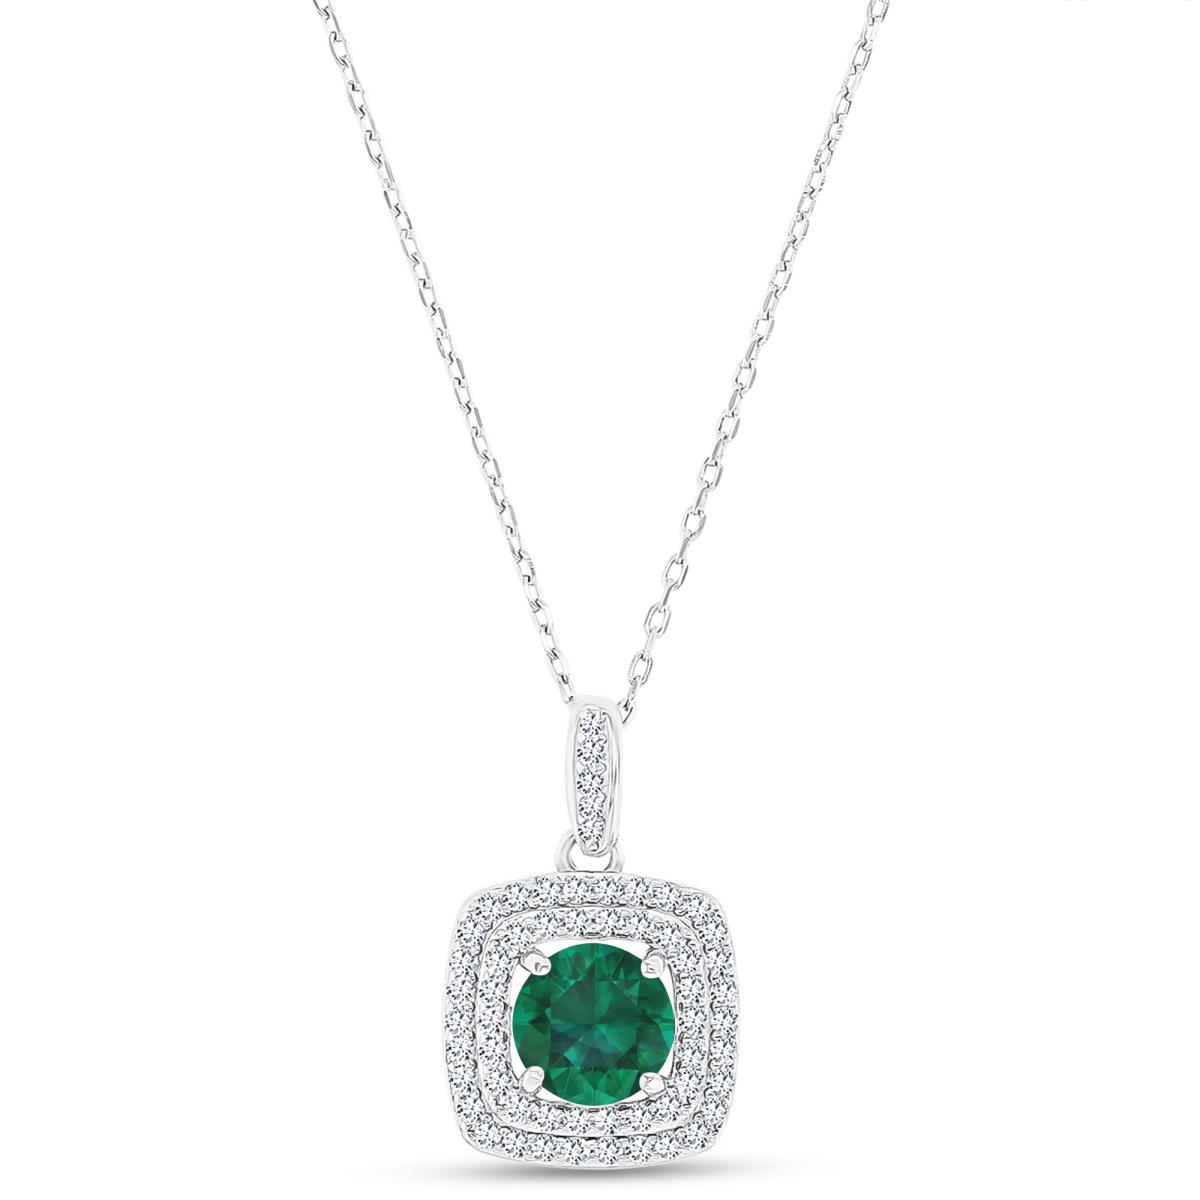 Sterling Silver Rhodium 7mm RD Cr Emerald/ Cr White Sapphire Cushion Double Halo 16"+2" Necklace